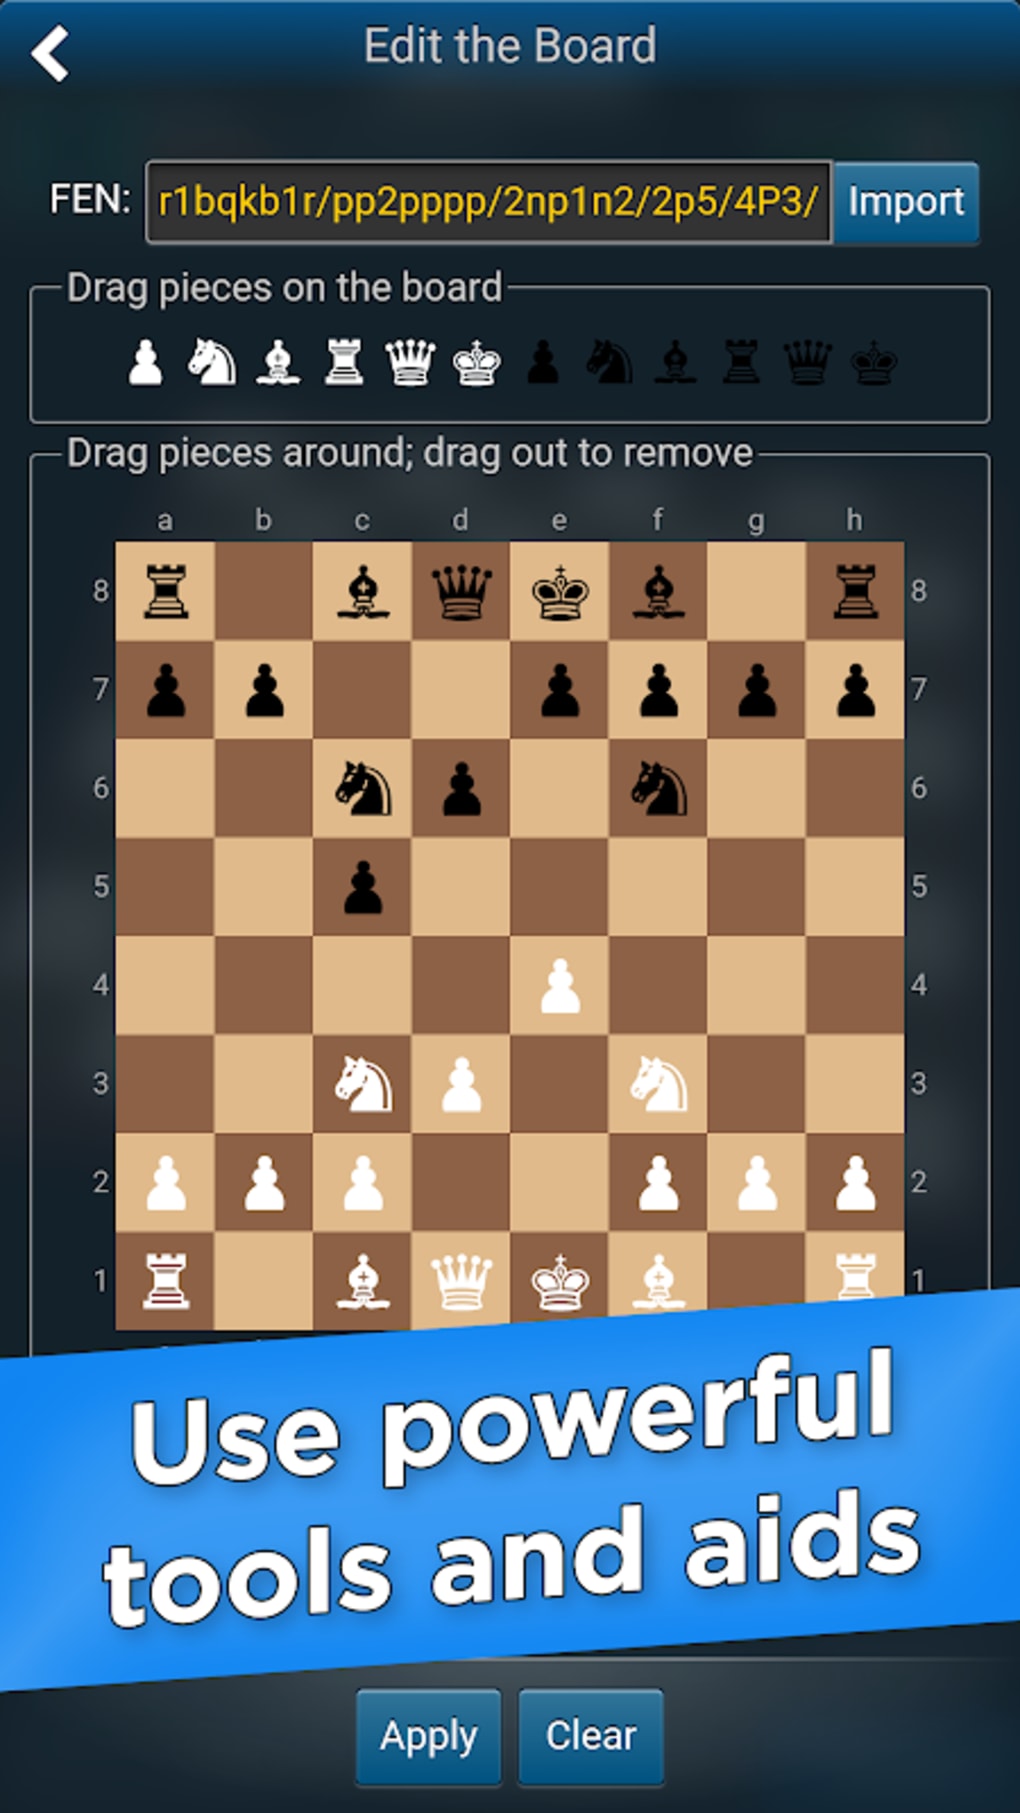 SparkChess Free APK for Android - Download